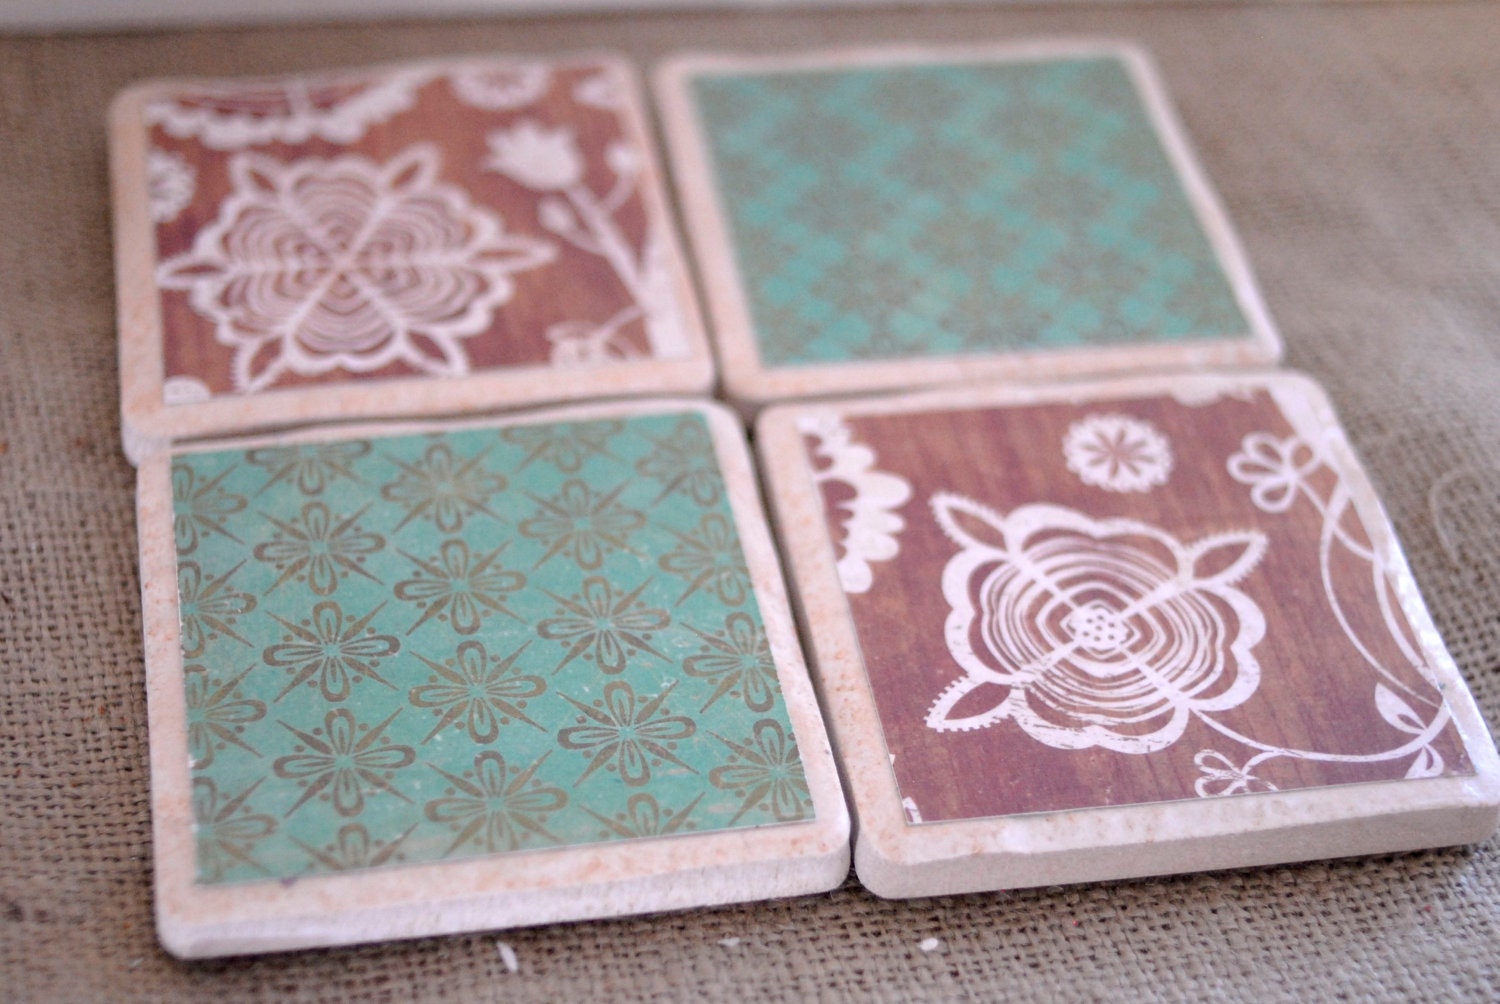 Rustic and Farmhouse Chic Coaster Set in Brown and Teal